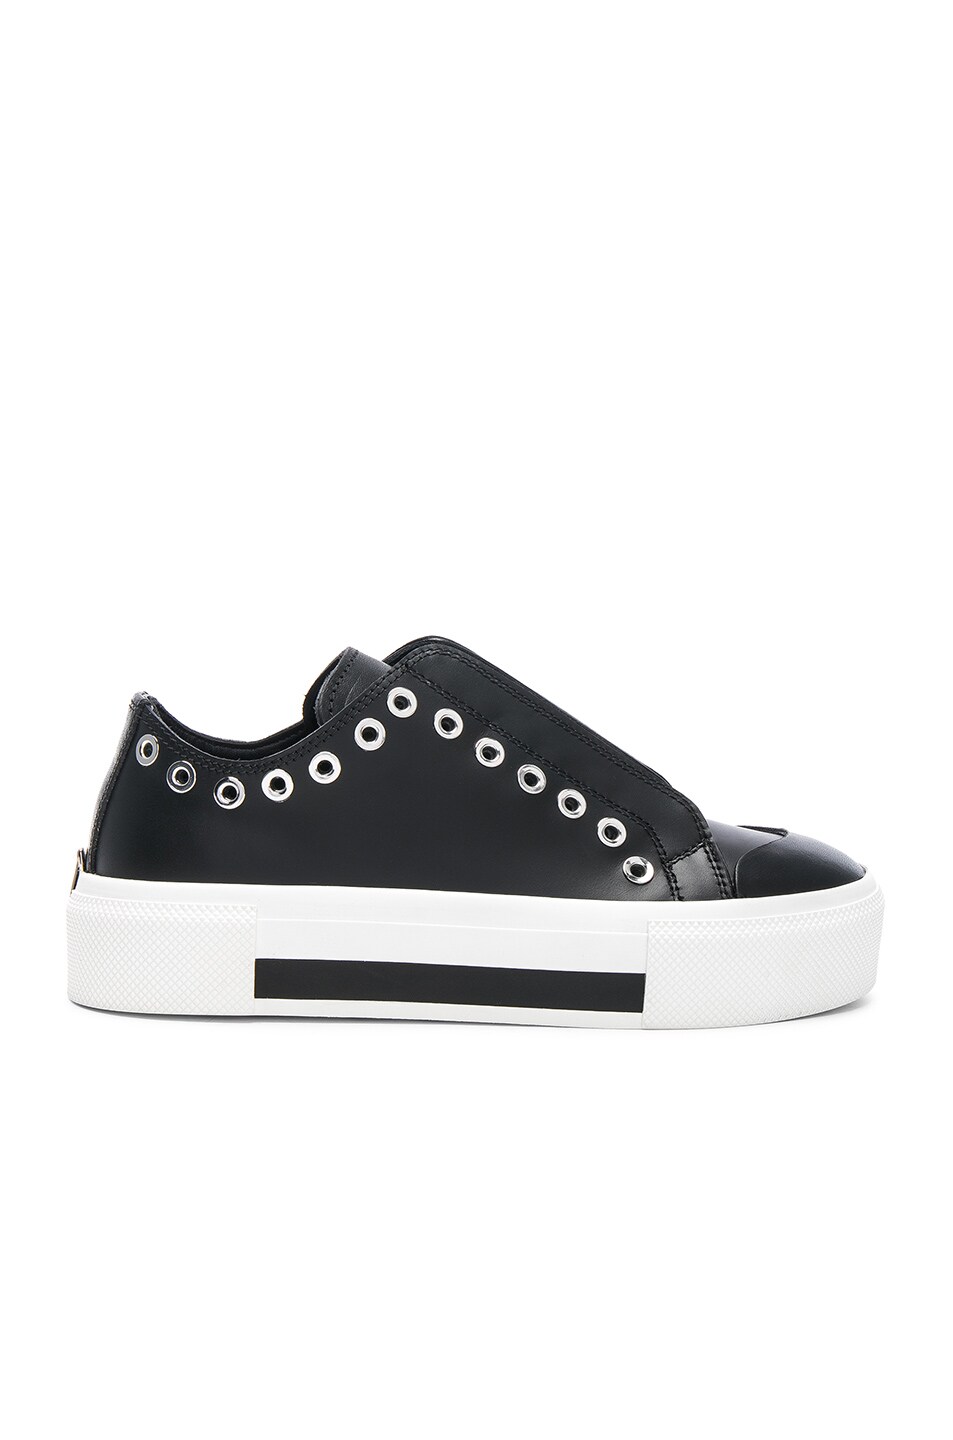 Image 1 of Alexander McQueen Eyelet Leather Platform Lace Up Sneakers in Black & Black